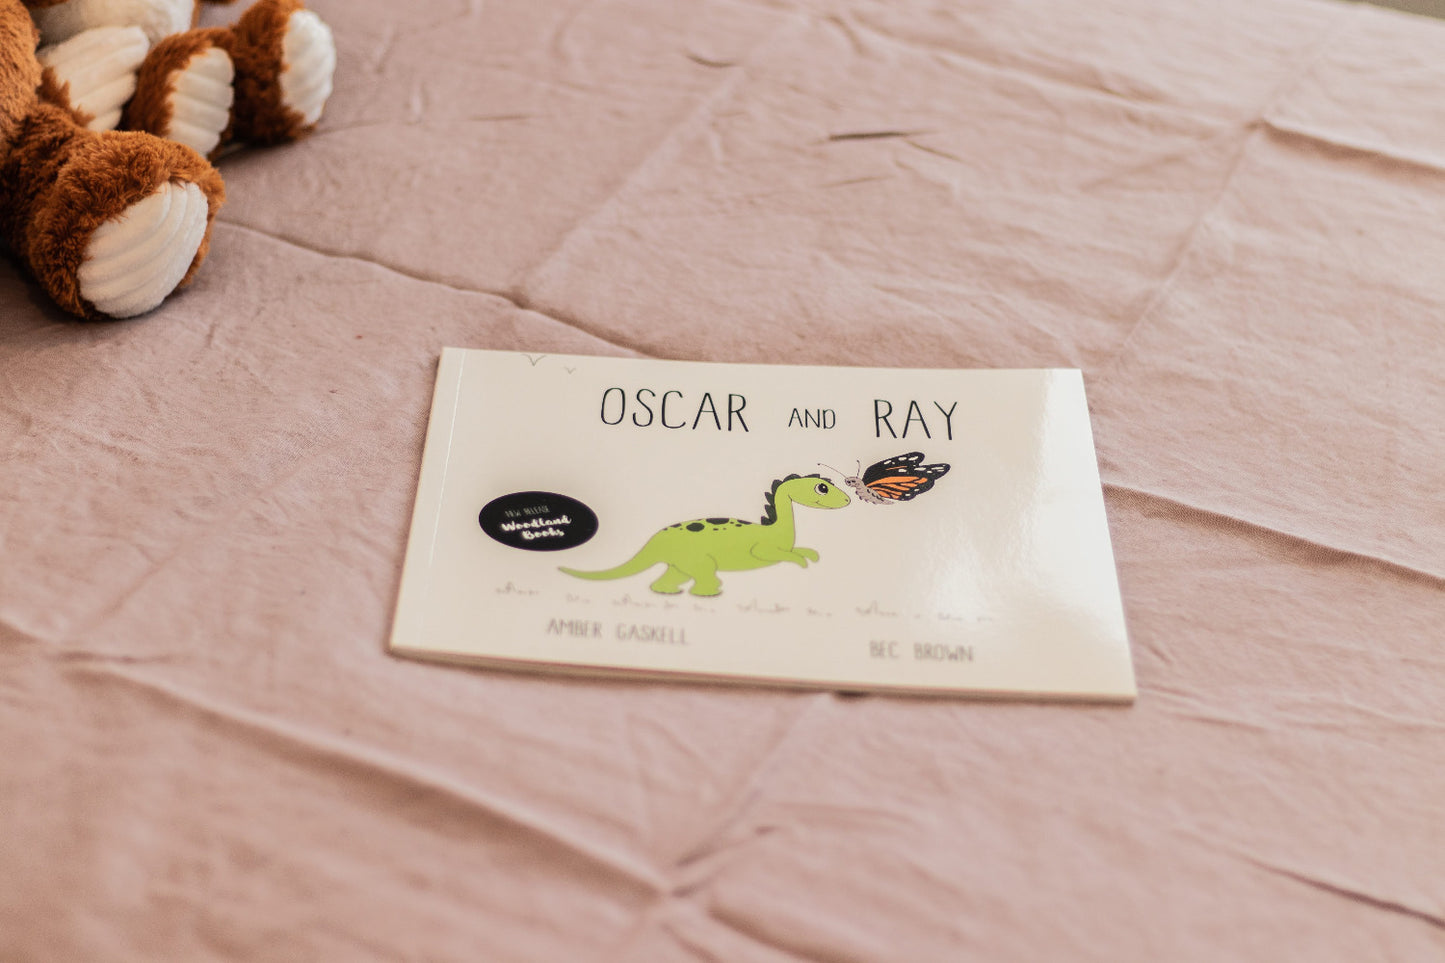 Oscar & Ray by Amber Gaskell - Illustrated by Bec Brown